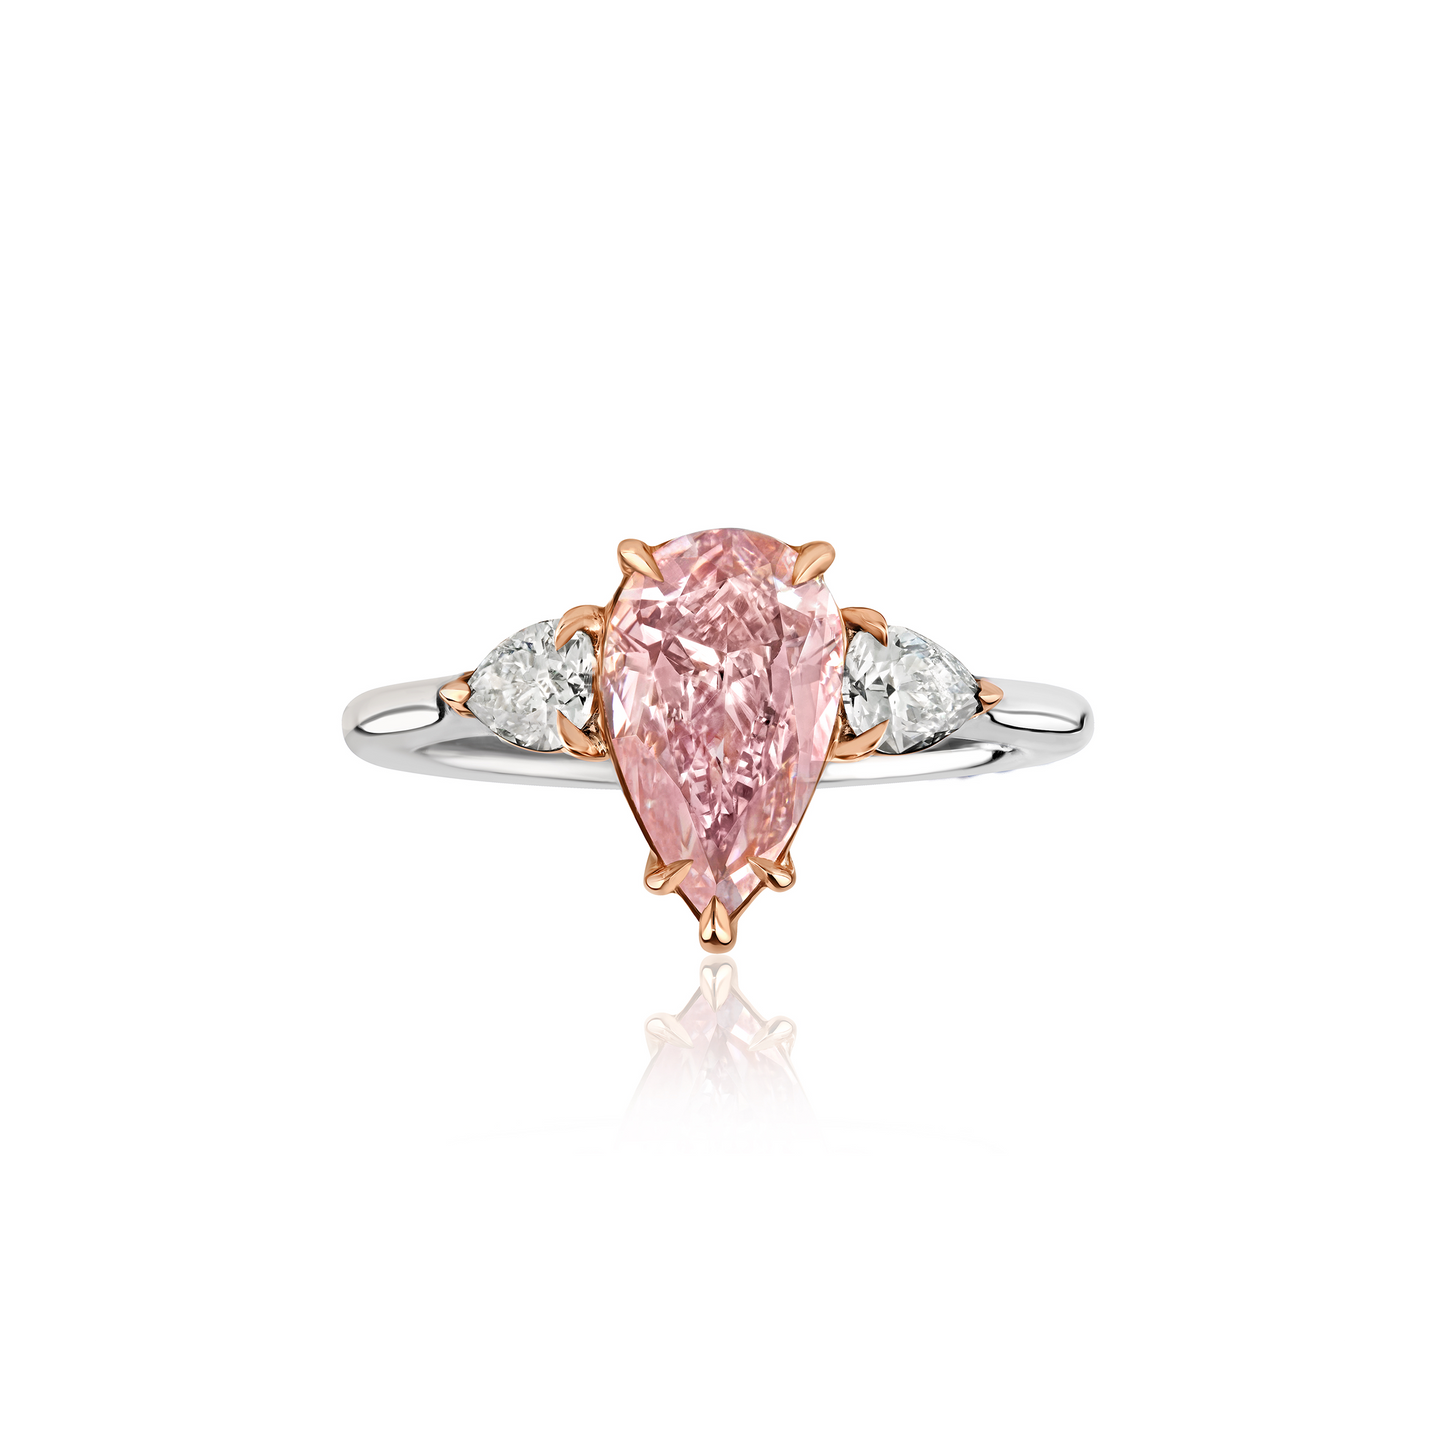 Fink's Exclusive Platinum Fancy Purplish Pink Pear Diamond Engagement Ring with Diamond Side Accents